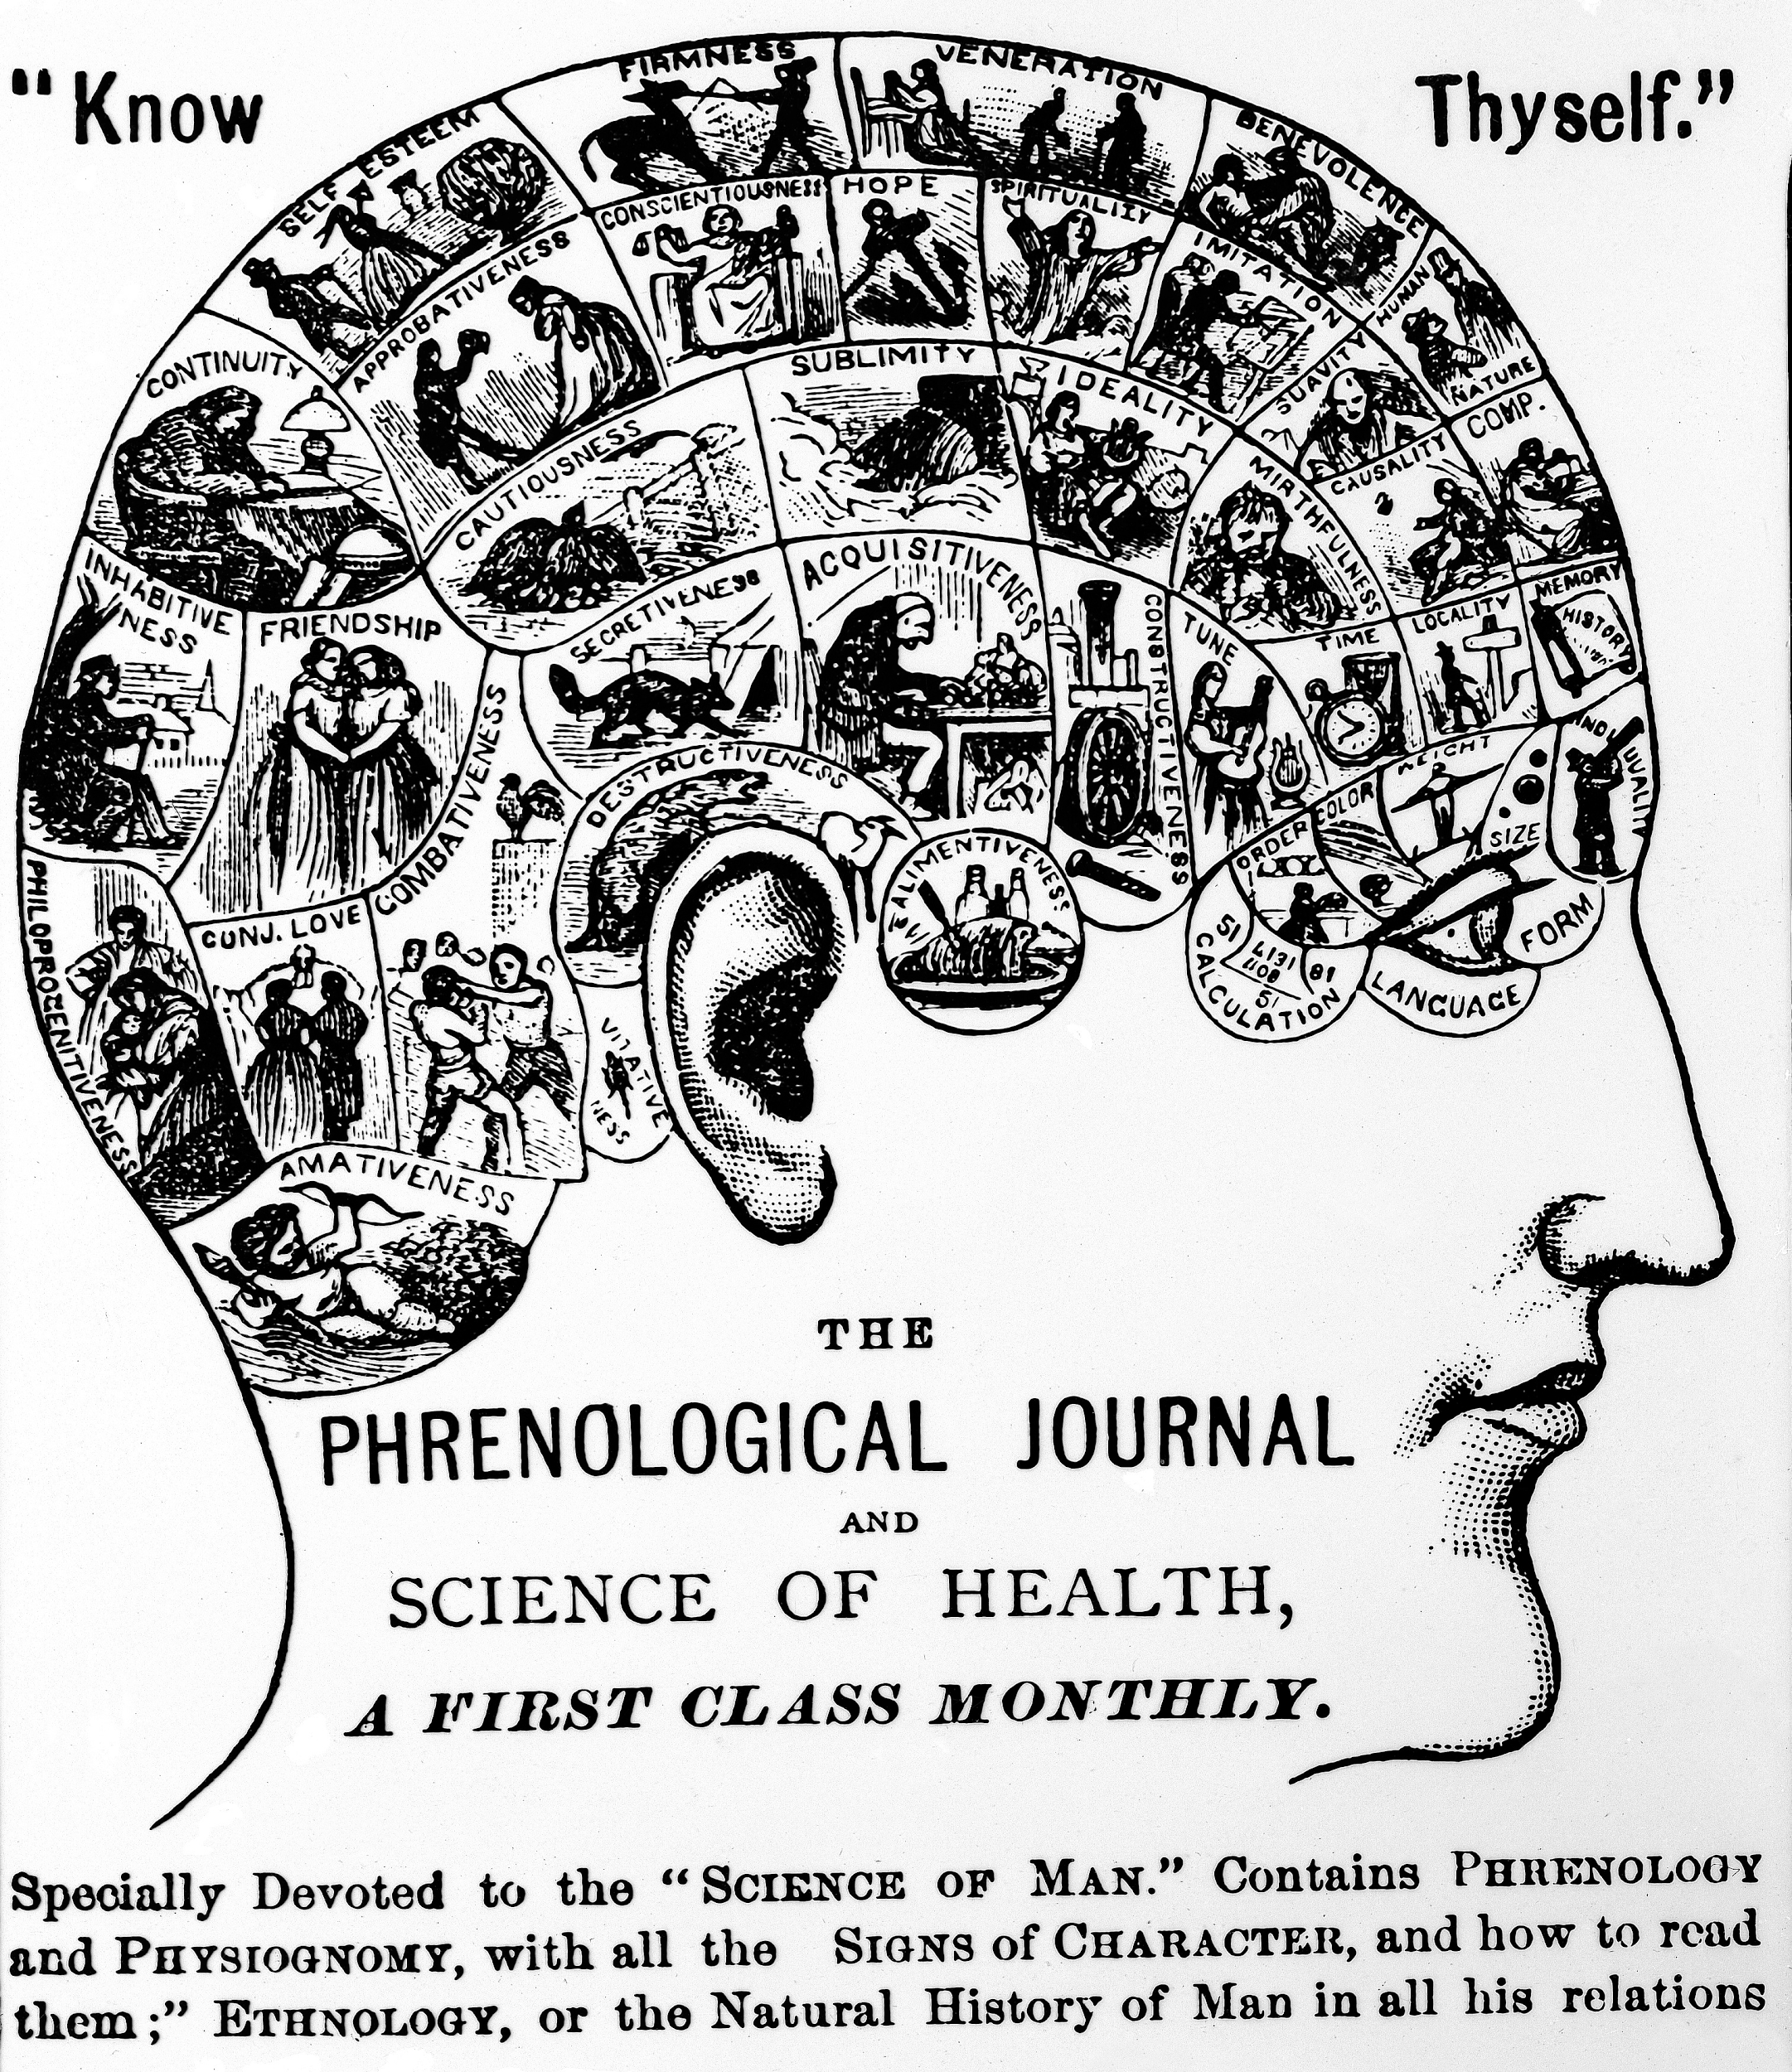 Head with images and human qualities drawn on it. Journal title printed at the bottom.